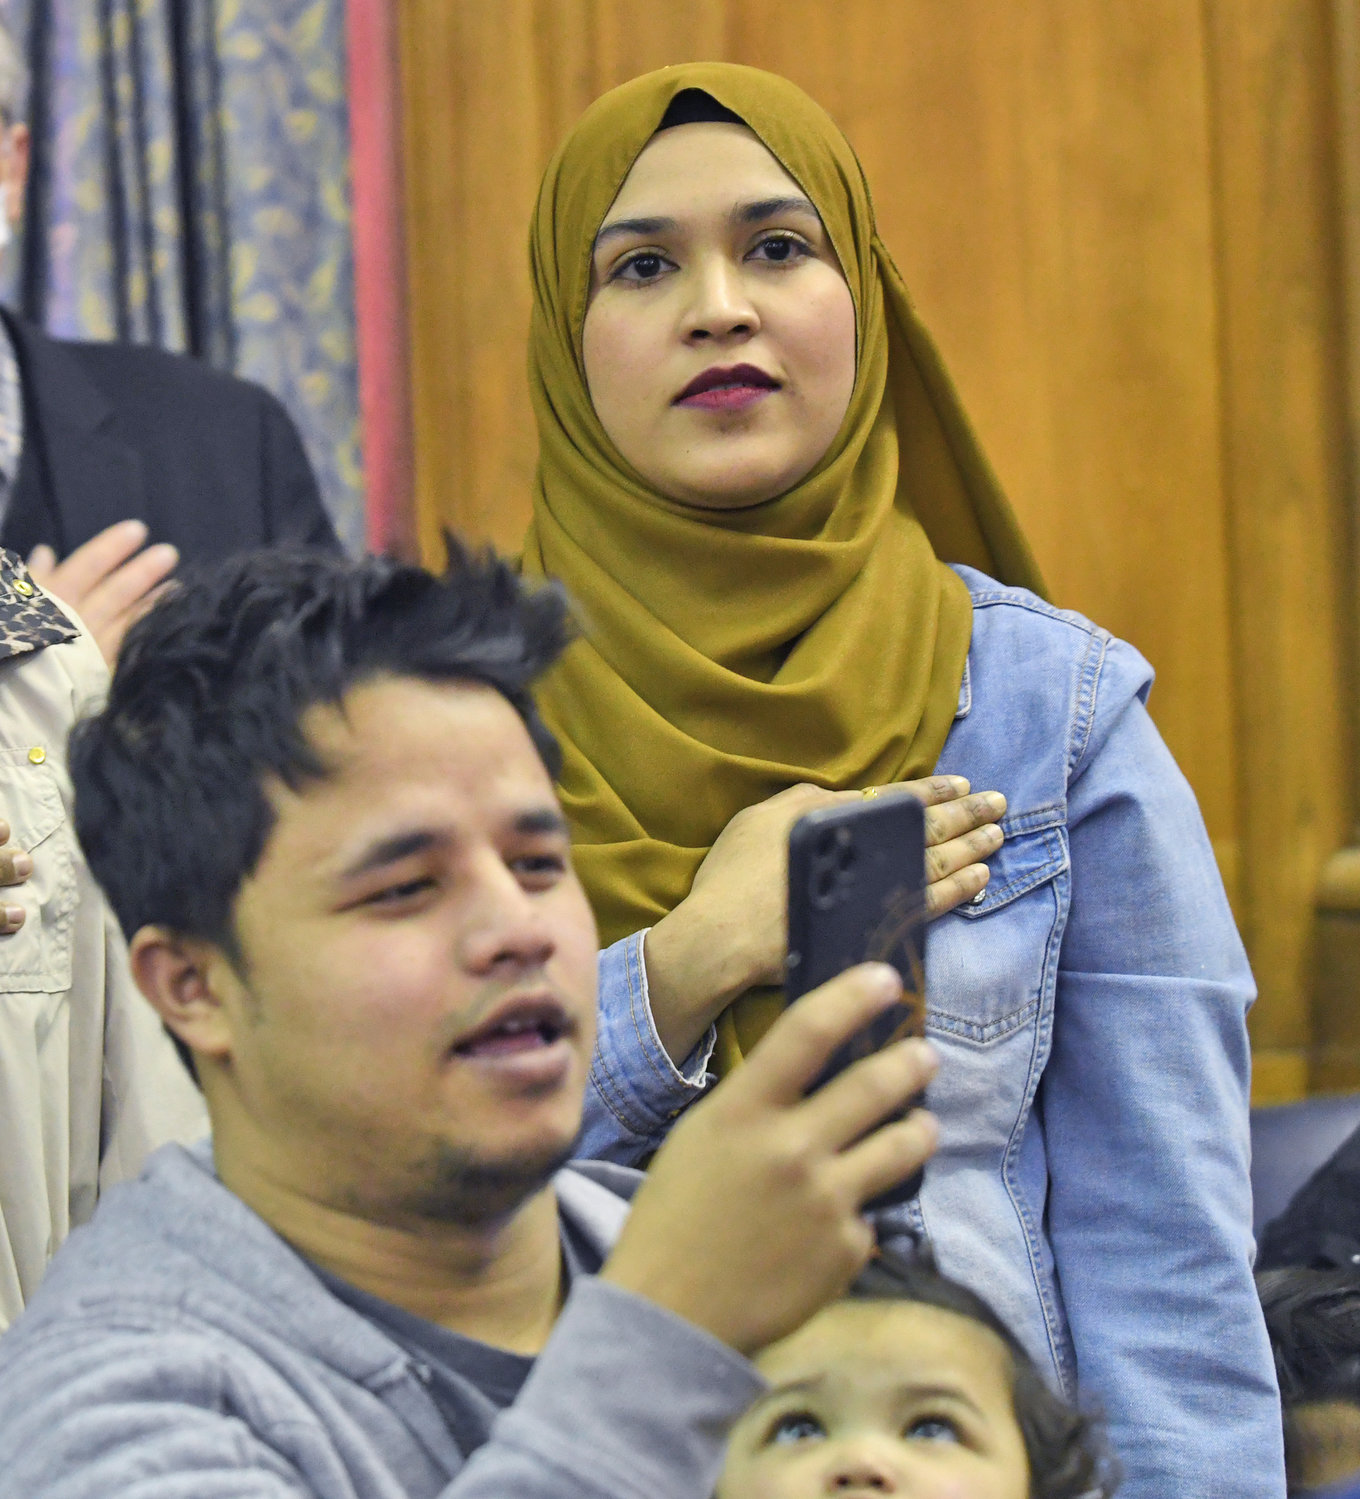 New citizen Siti Fatimah Binti Abdul Salam formerly of Malaysia recites the Pledge of Allegiance on Thursday during a naturalization ceremony at the Alexander Pirnie Federal Courthouse in Utica which welcomed 50 new American citizens.